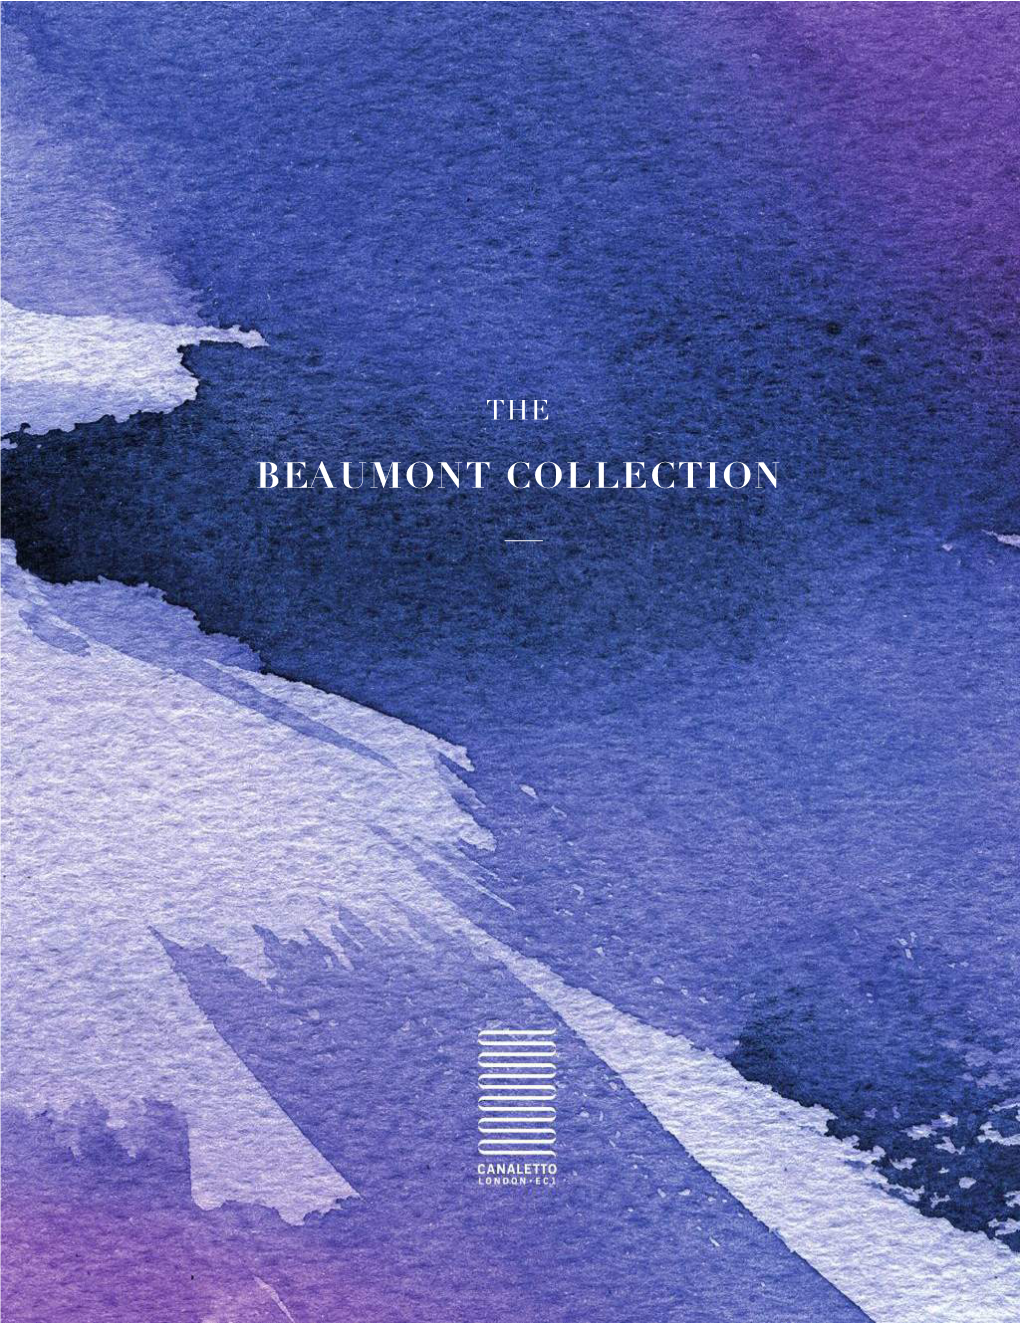 Beaumont Collection —